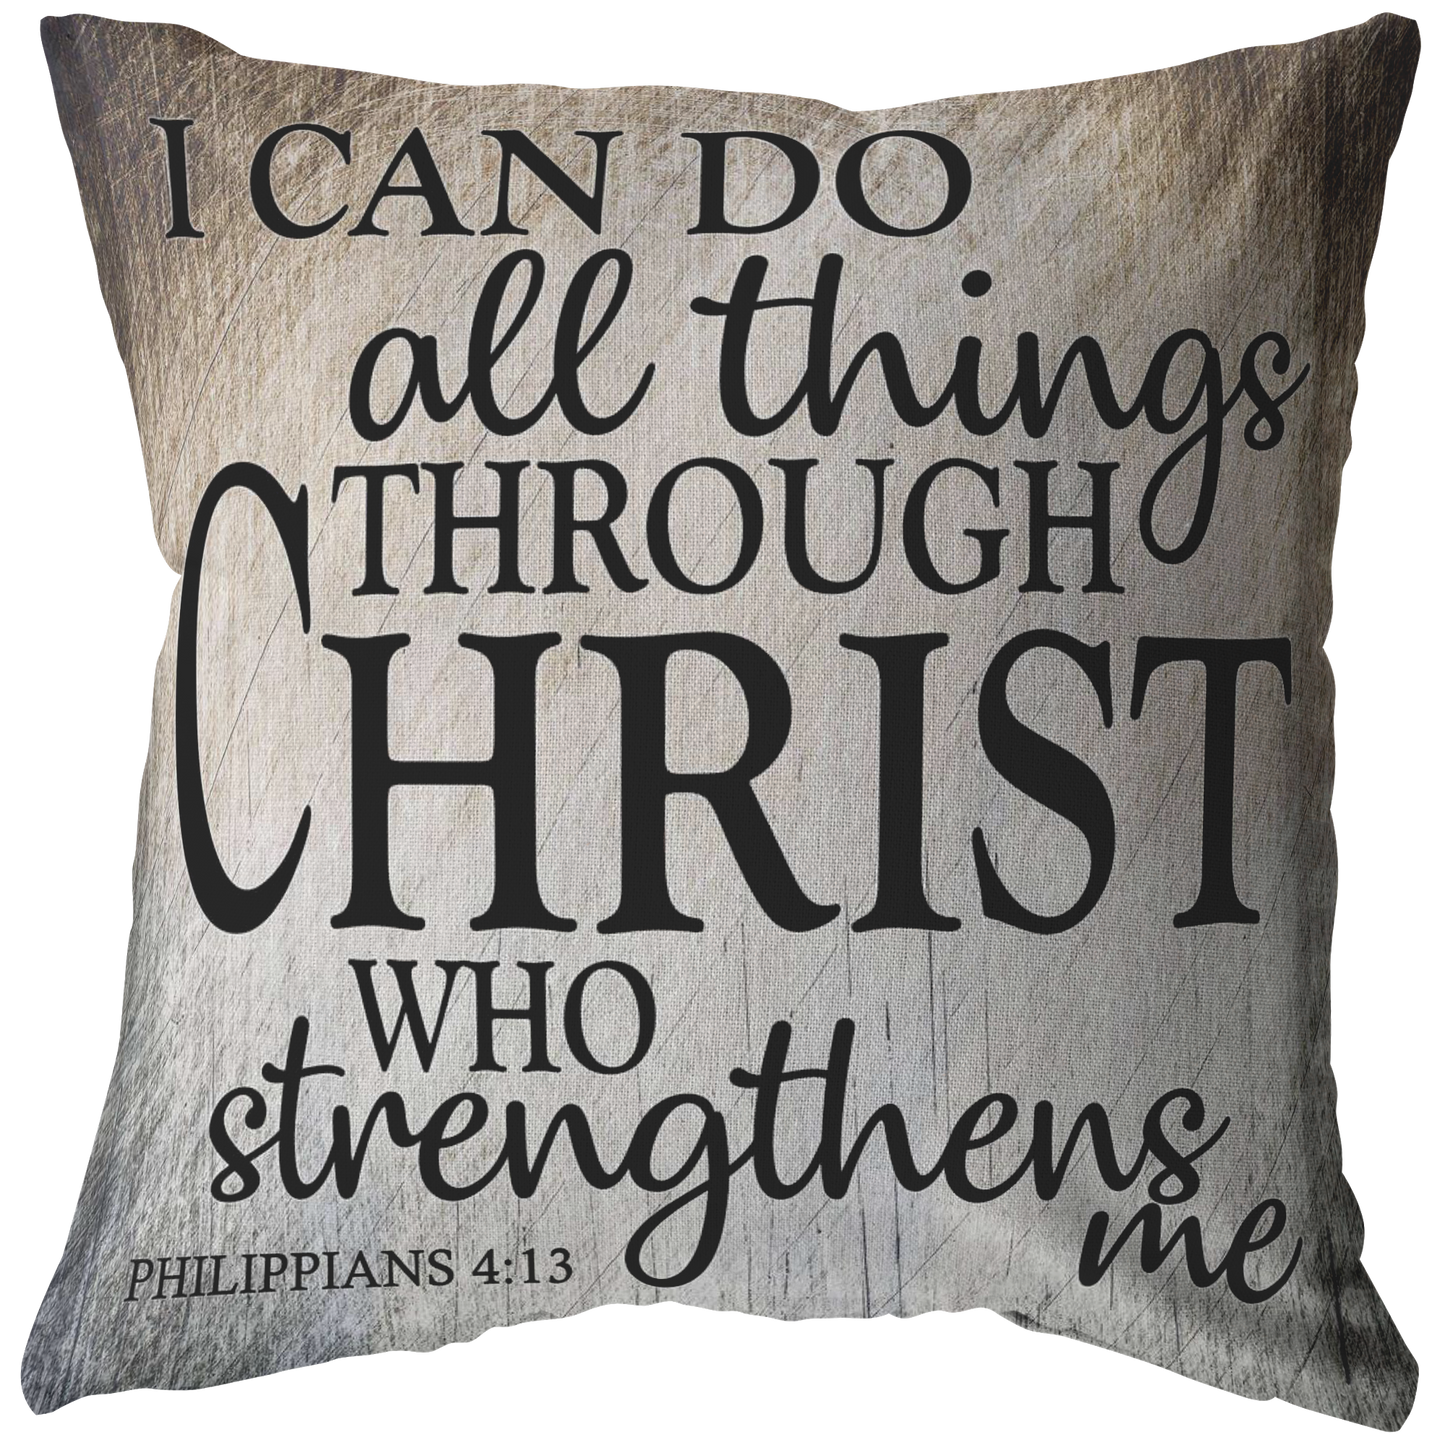 "I Can Do All Things Through Christ" Pillow